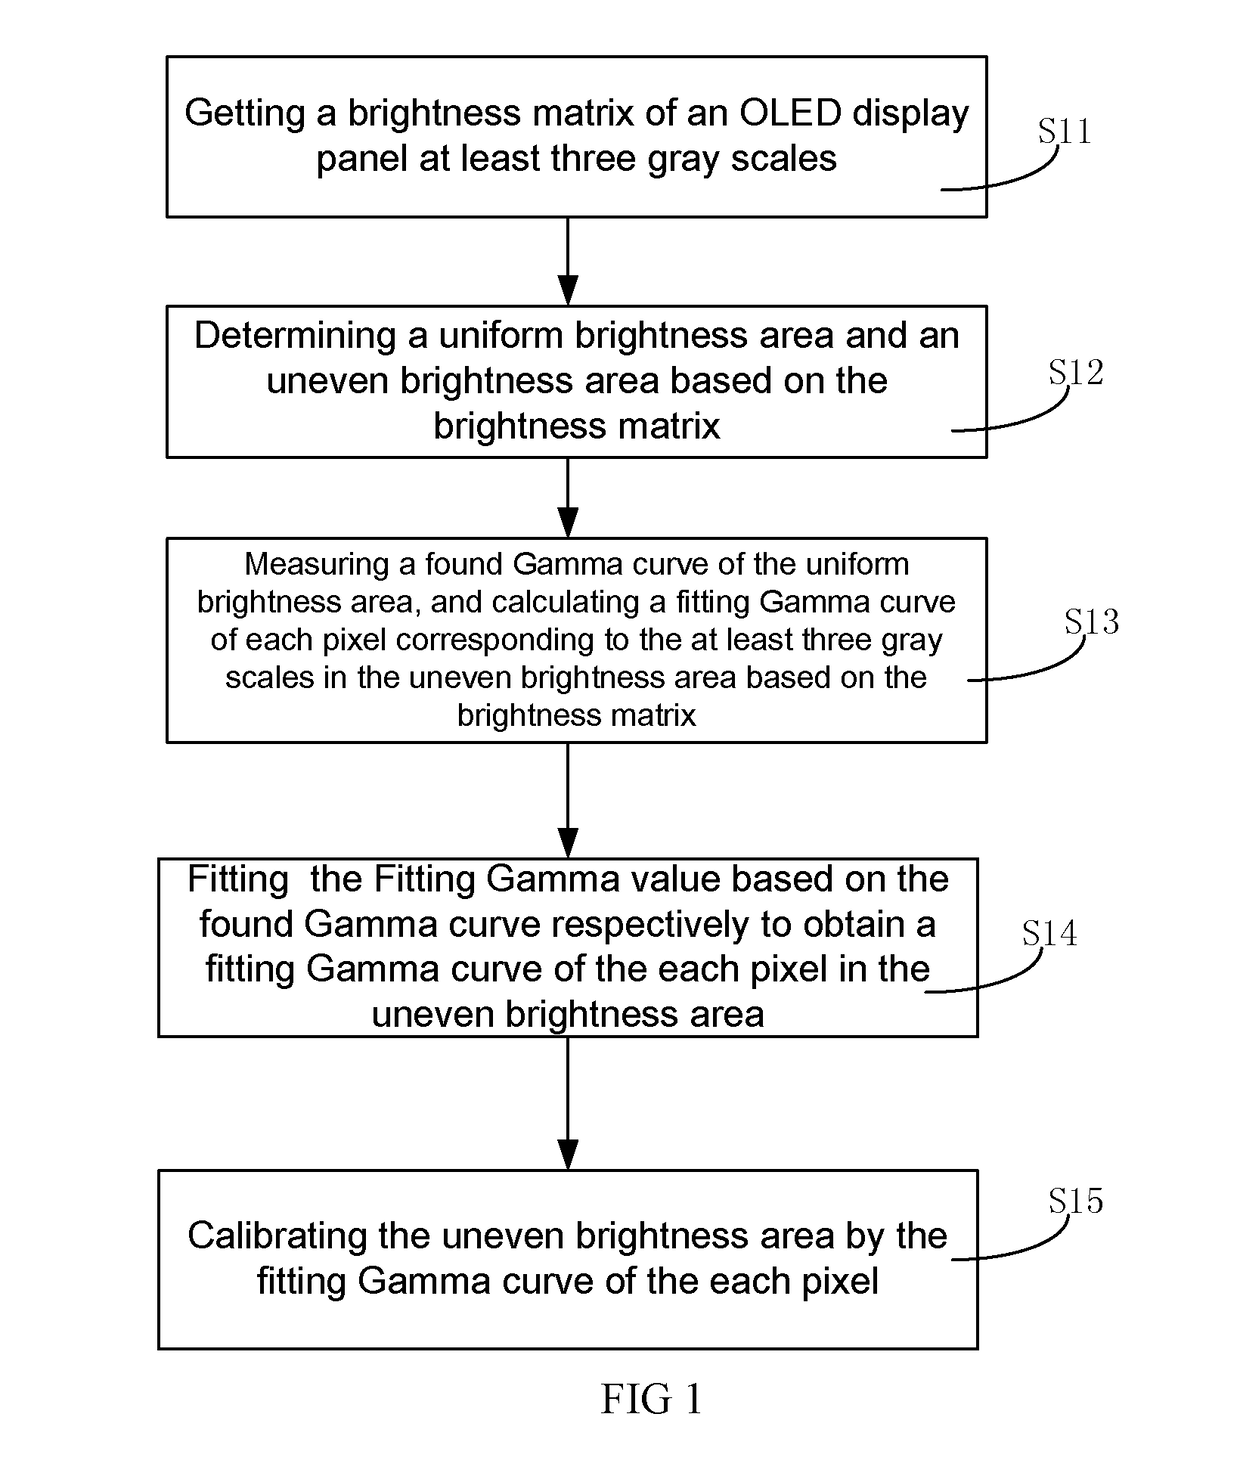 Method For Calibrating Brightness Unevenness Of OLED Display Panel